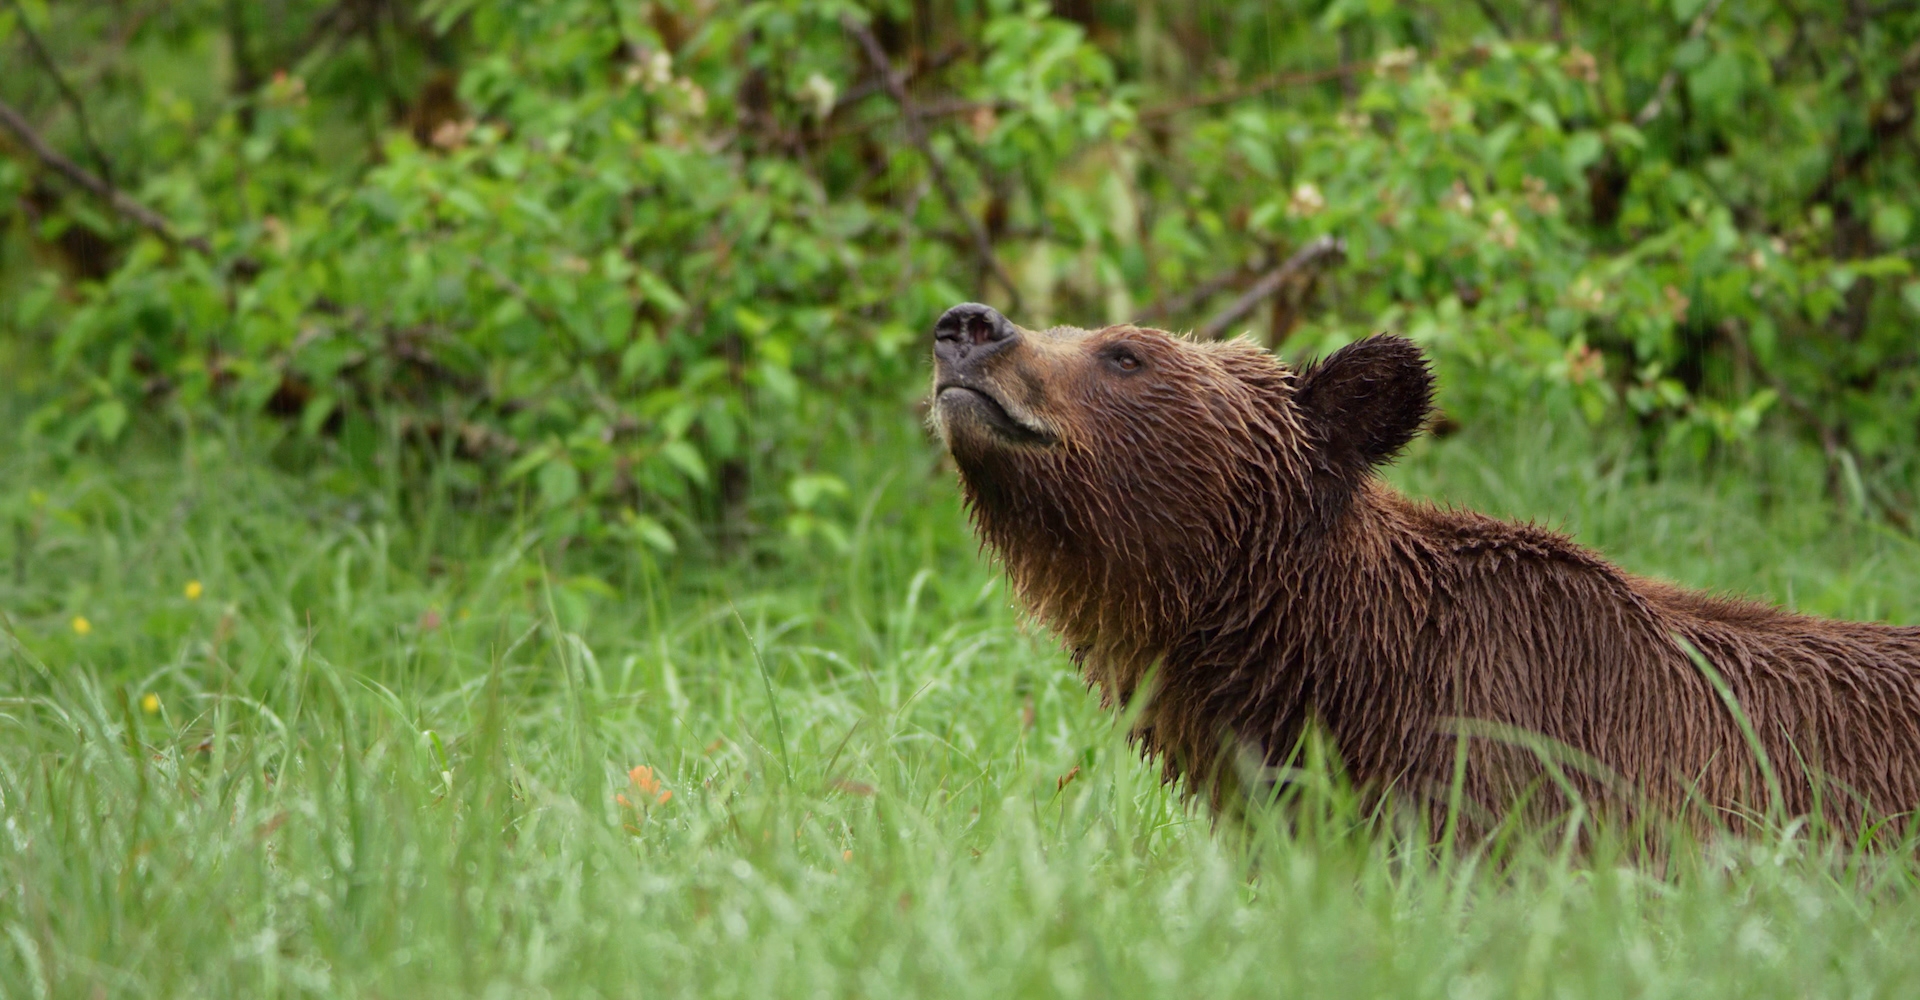 A close up of a bear lifting its head above the grass in the Great Bear Rainforest.